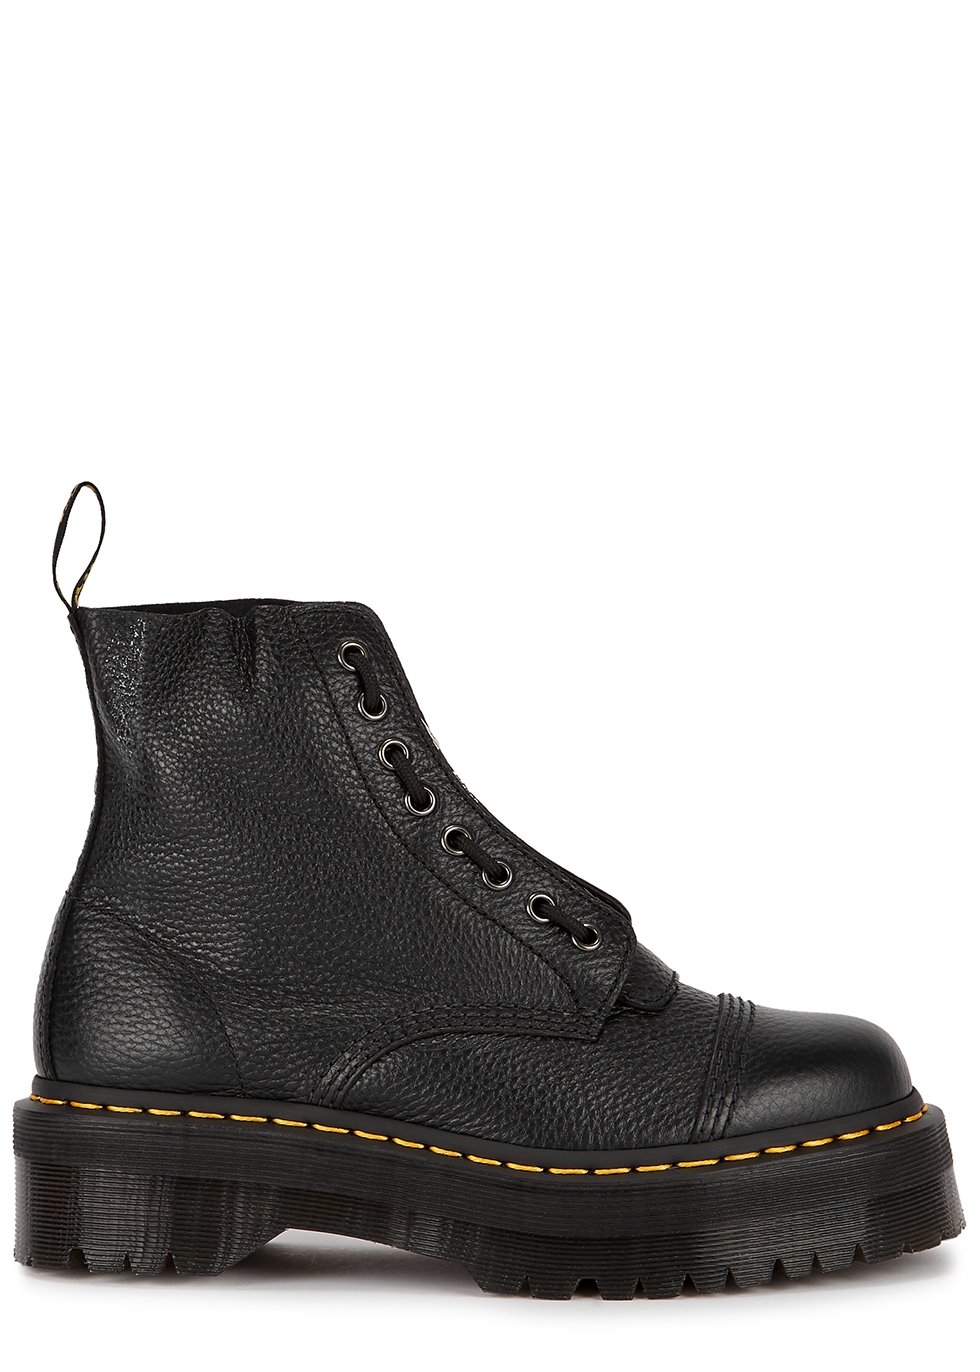 Sinclair black leather ankle boots